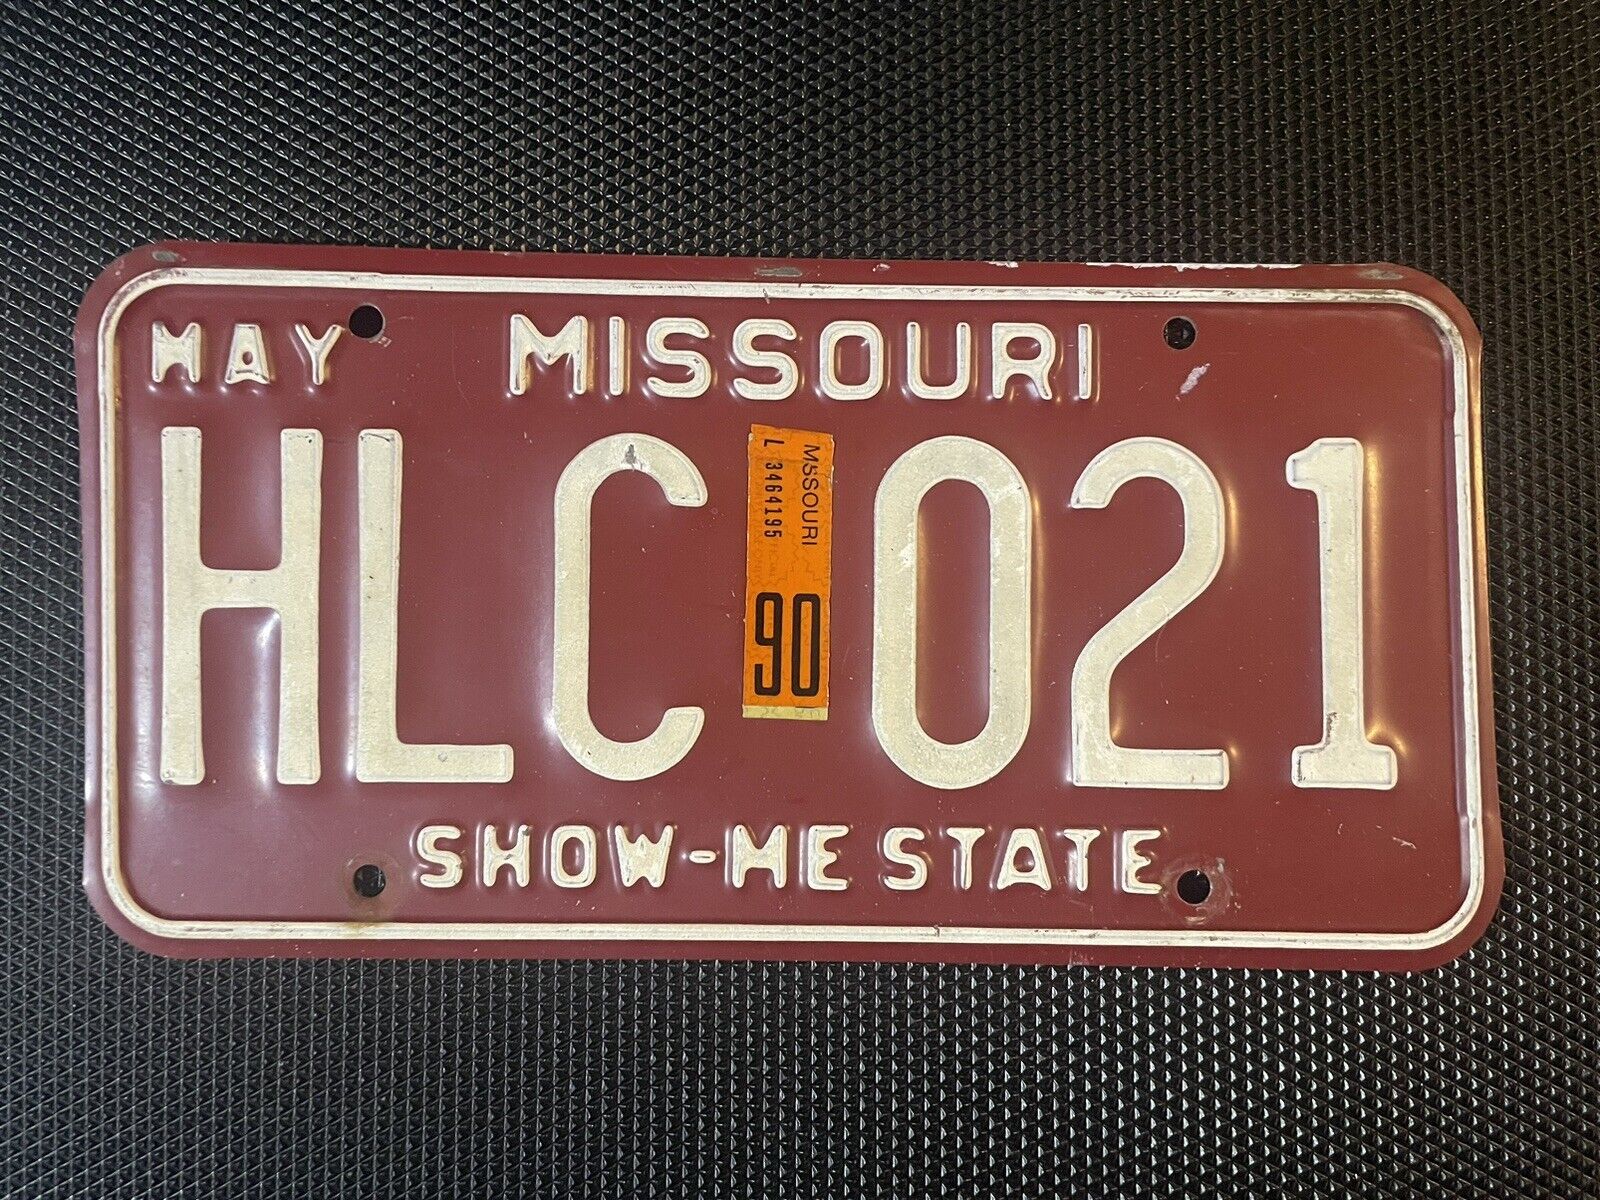 MISSOURI LICENSE PLATE 1990 MAY HLC 021